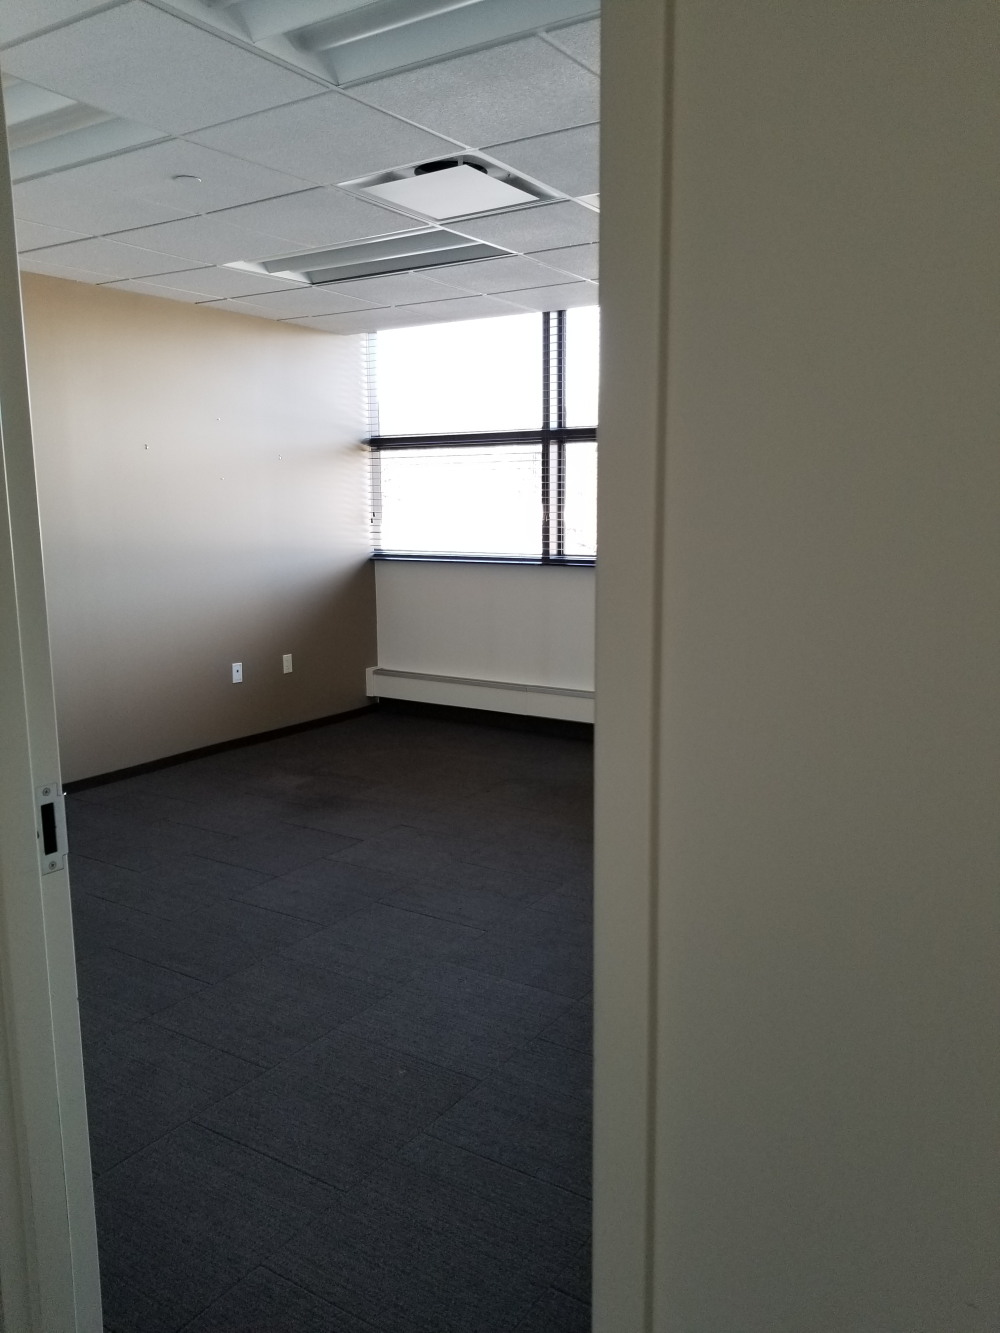 Photo of office where NL allegedly has an office.